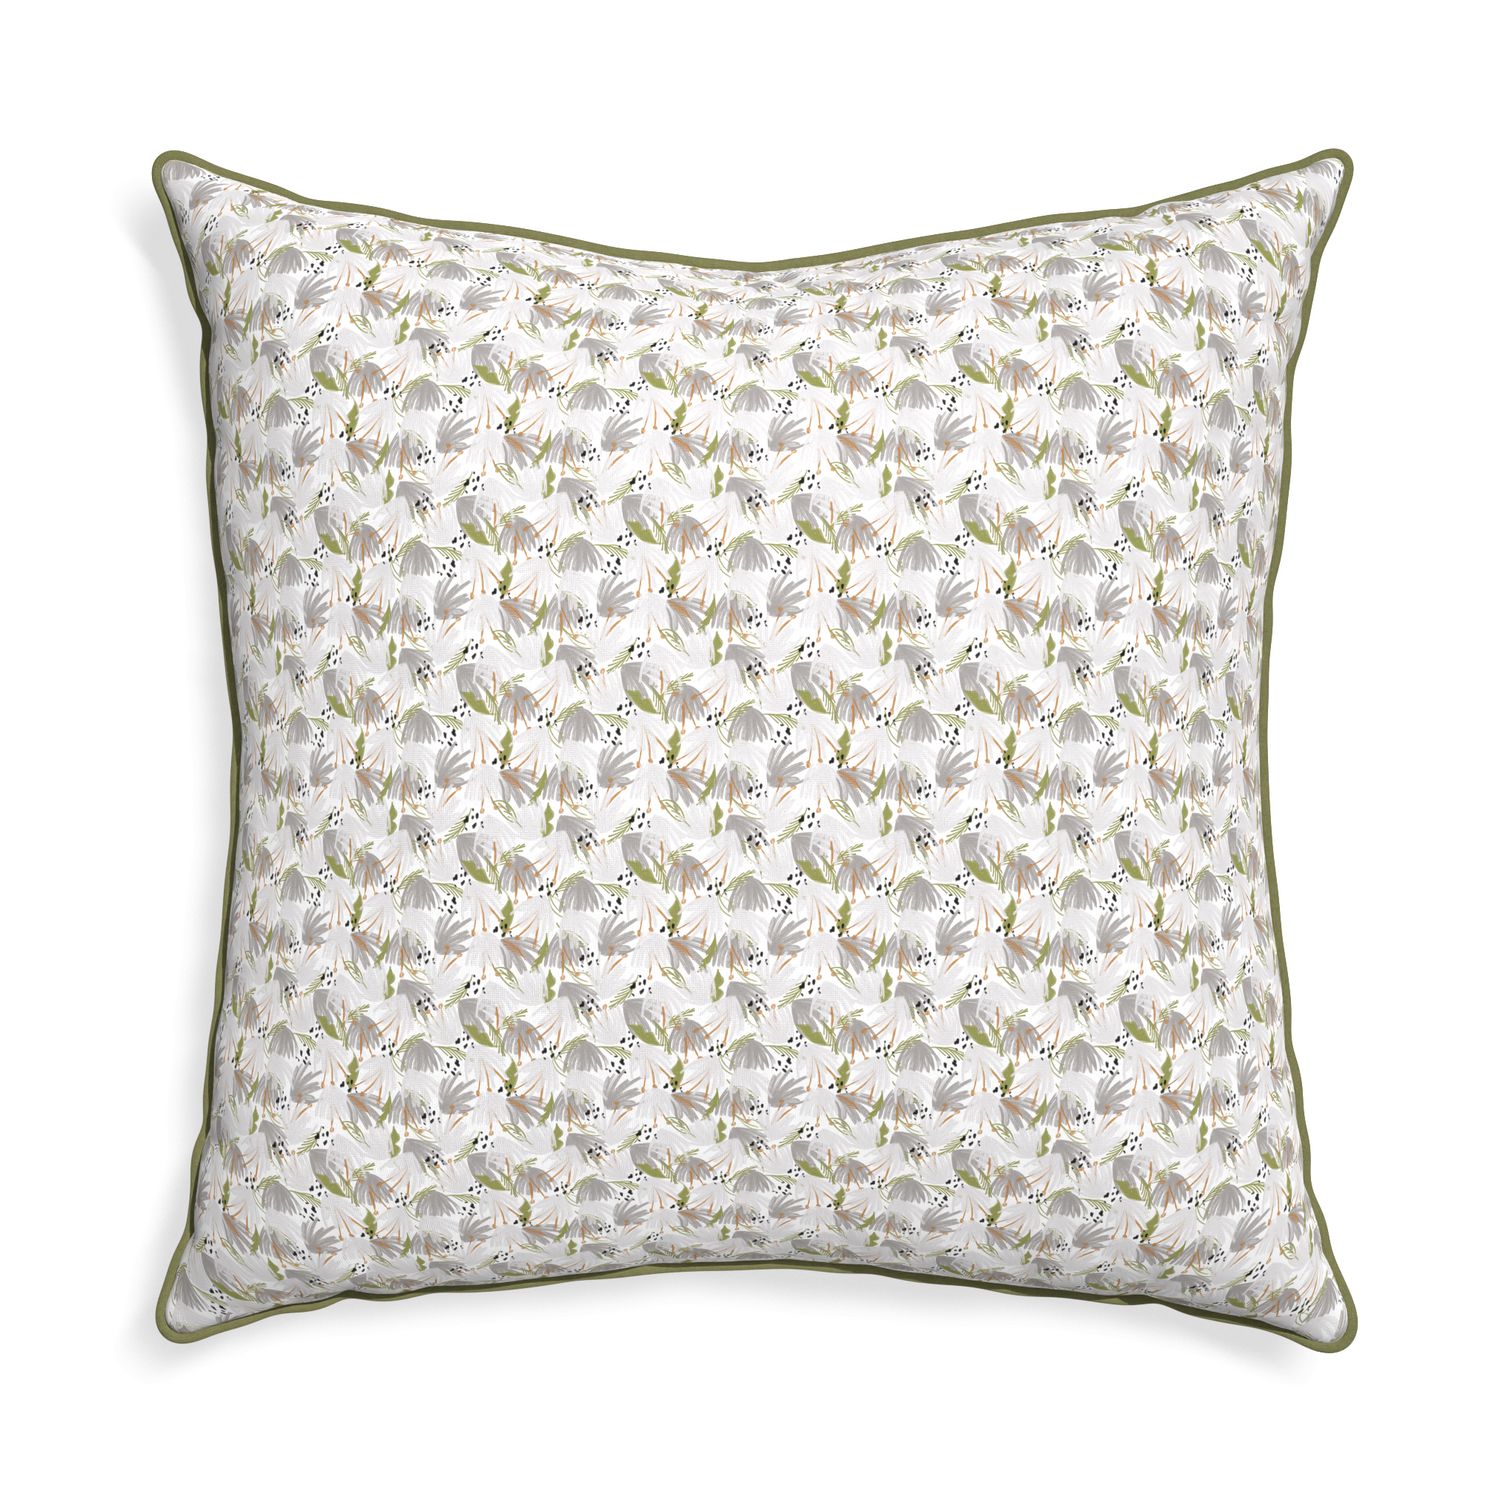 square grey floral pillow with moss green piping